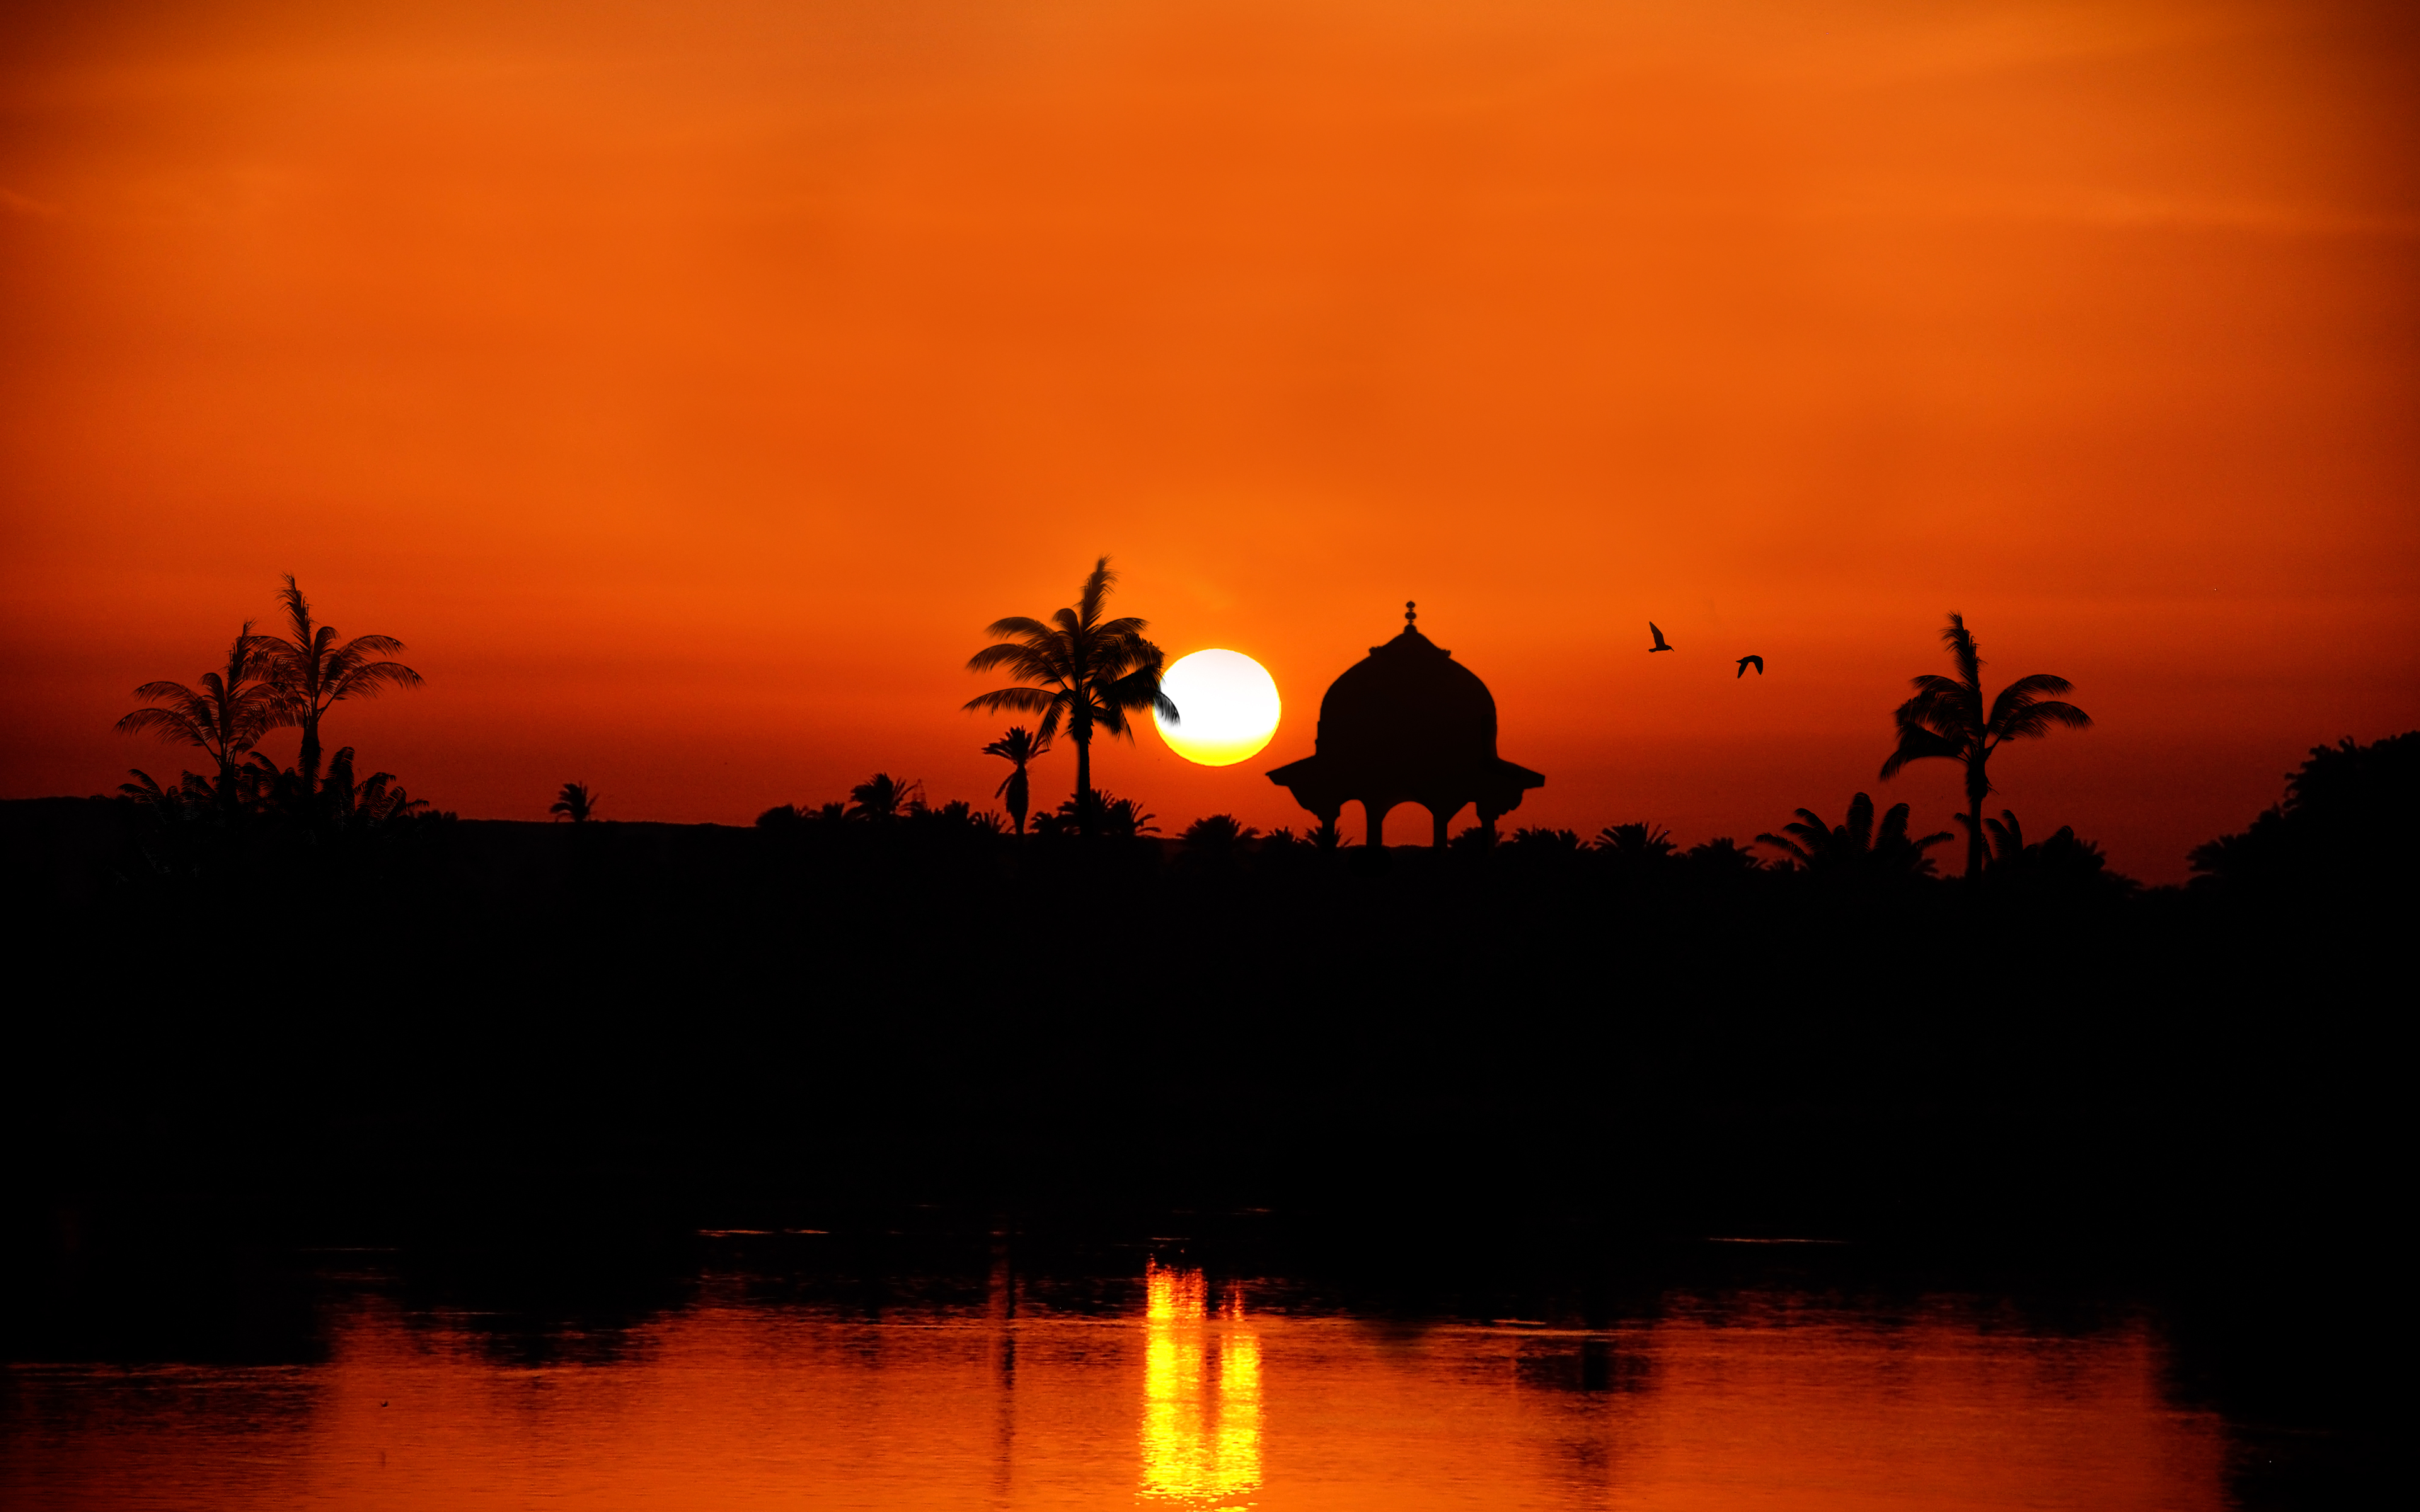 nile wallpaper,sky,sunset,afterglow,red sky at morning,orange